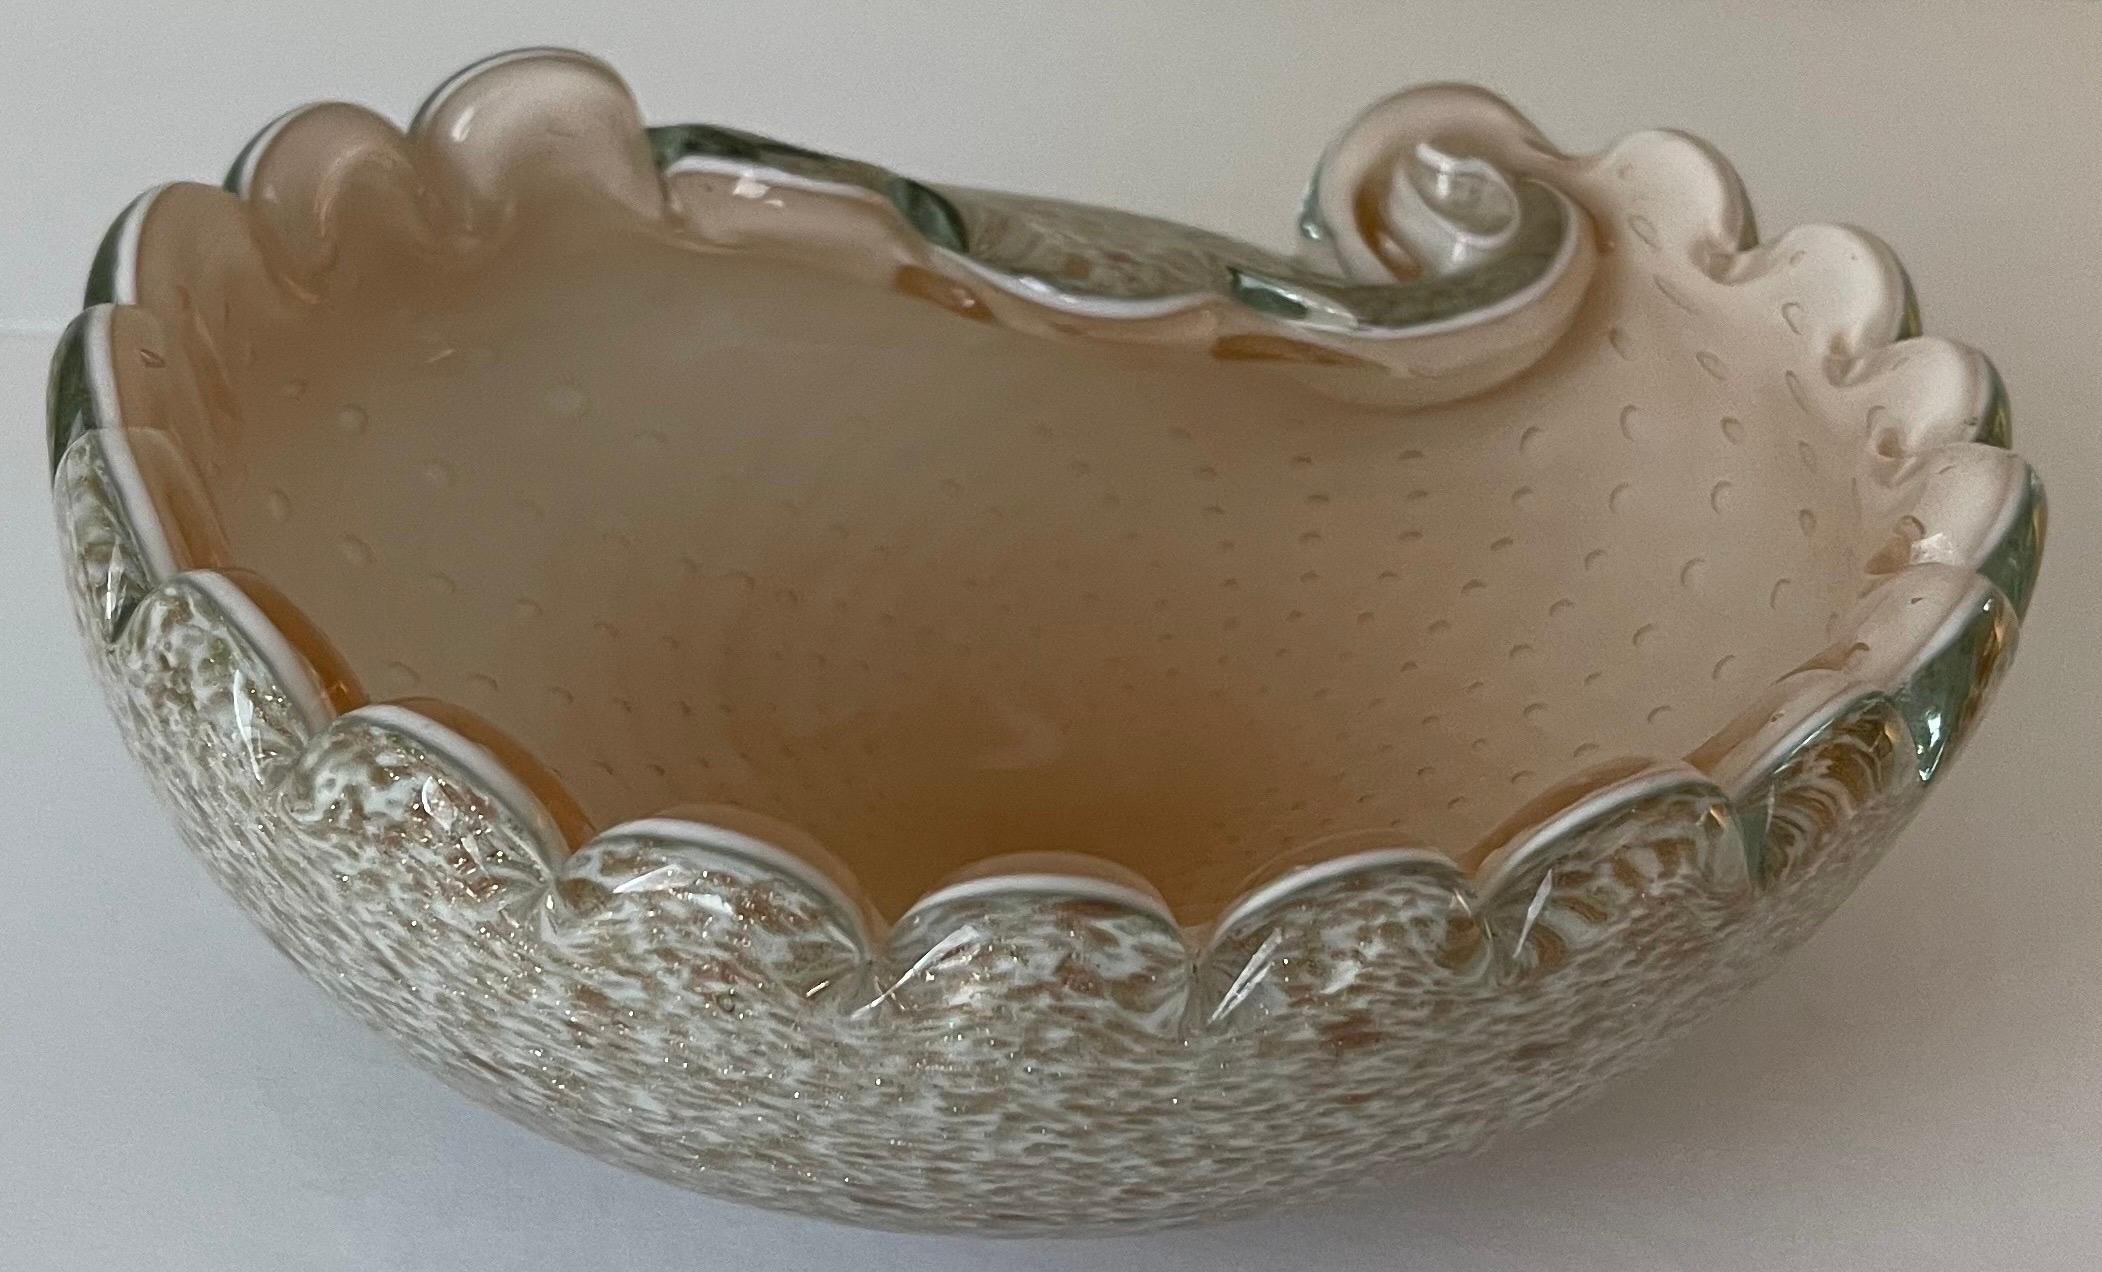 Mid-century Murano glass ashtray. Shell pink glass interior with all over controlled bubbles. Scalloped edges. Outside of bowl is white glass with scattered bronze and gold flecks. No makers mark or signature.